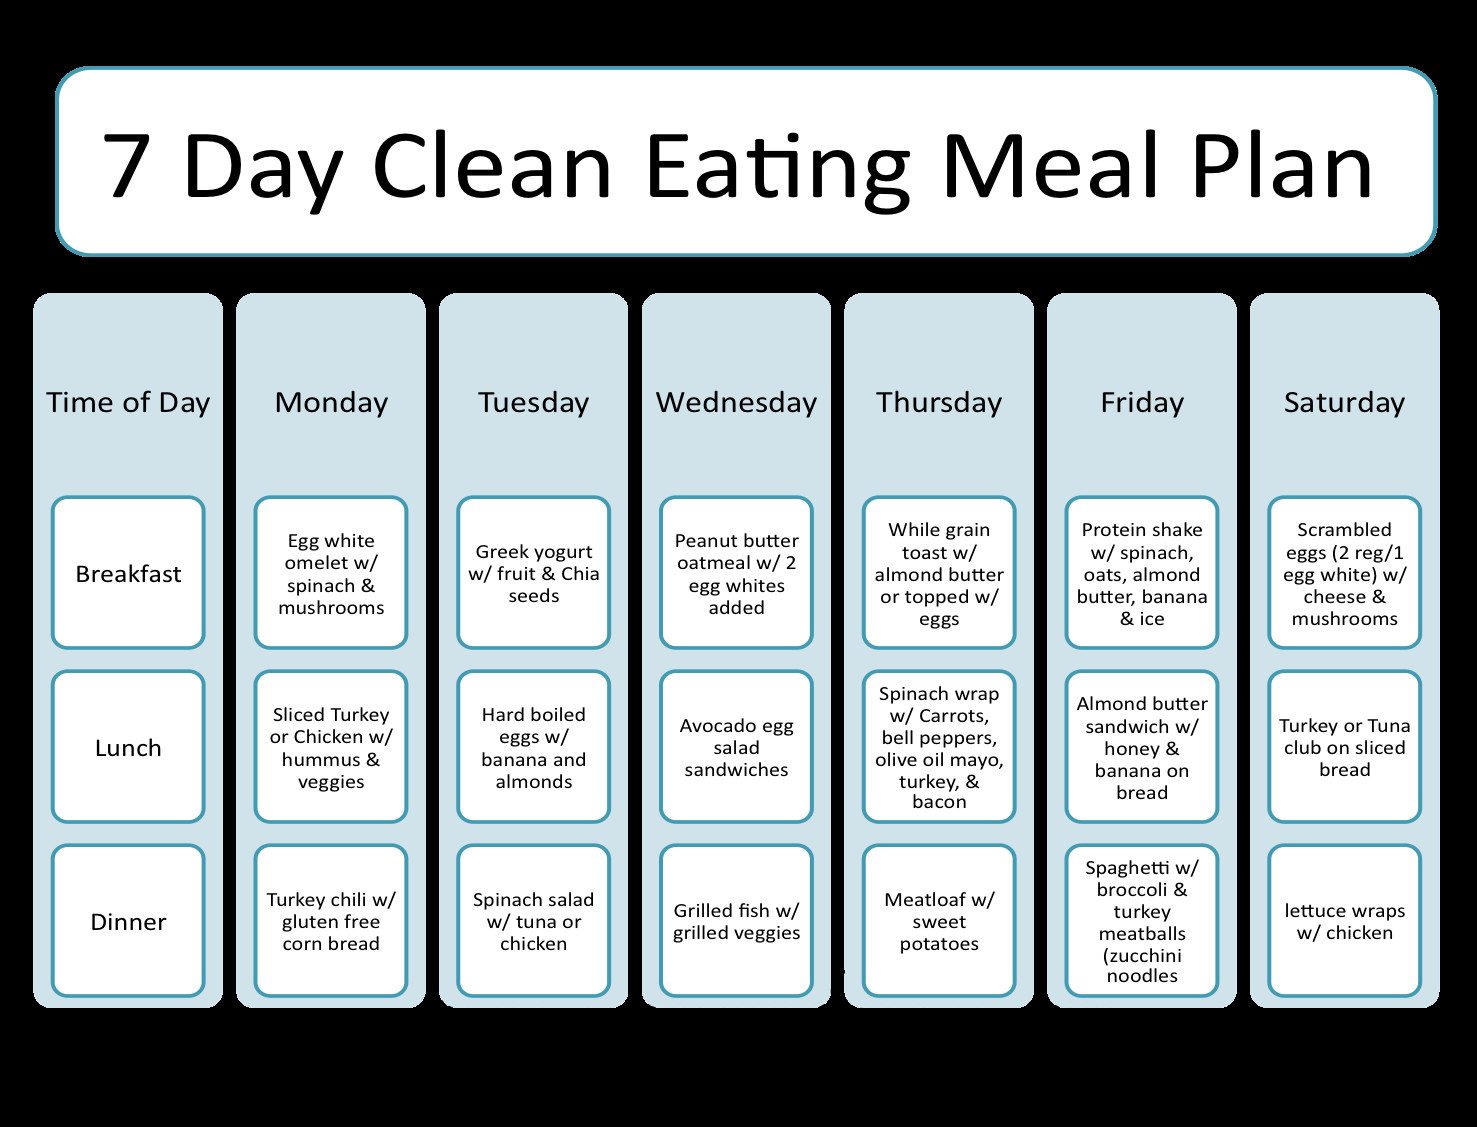 Clean Eating 7 Day Meal Plan
 Health and Fitness on Pinterest